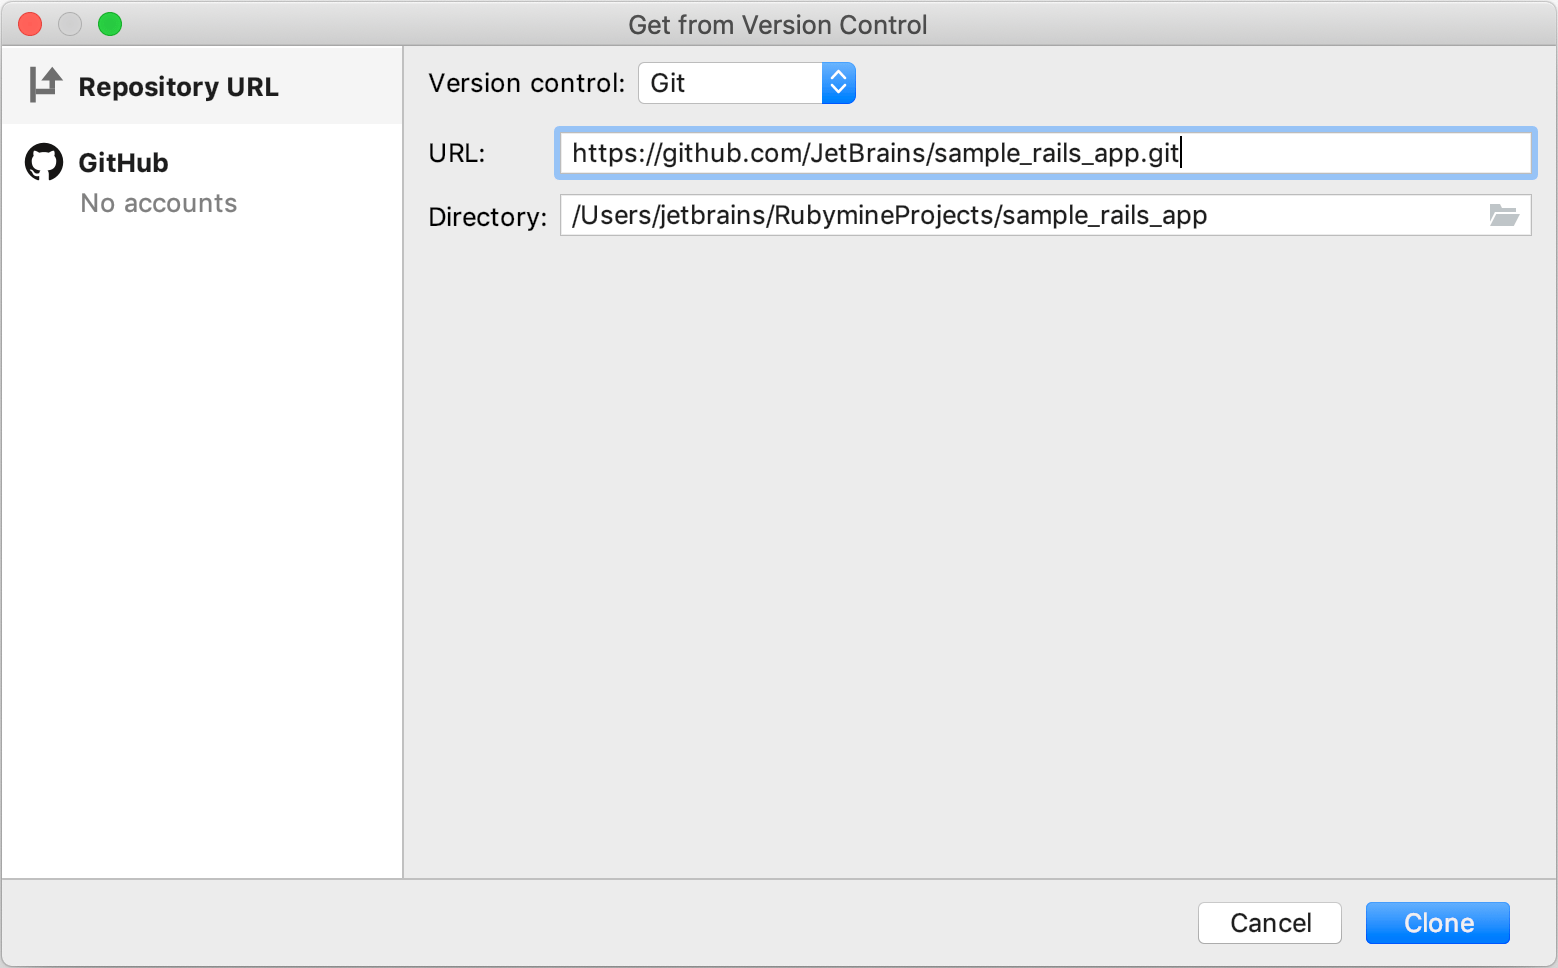 Get from Version Control dialog